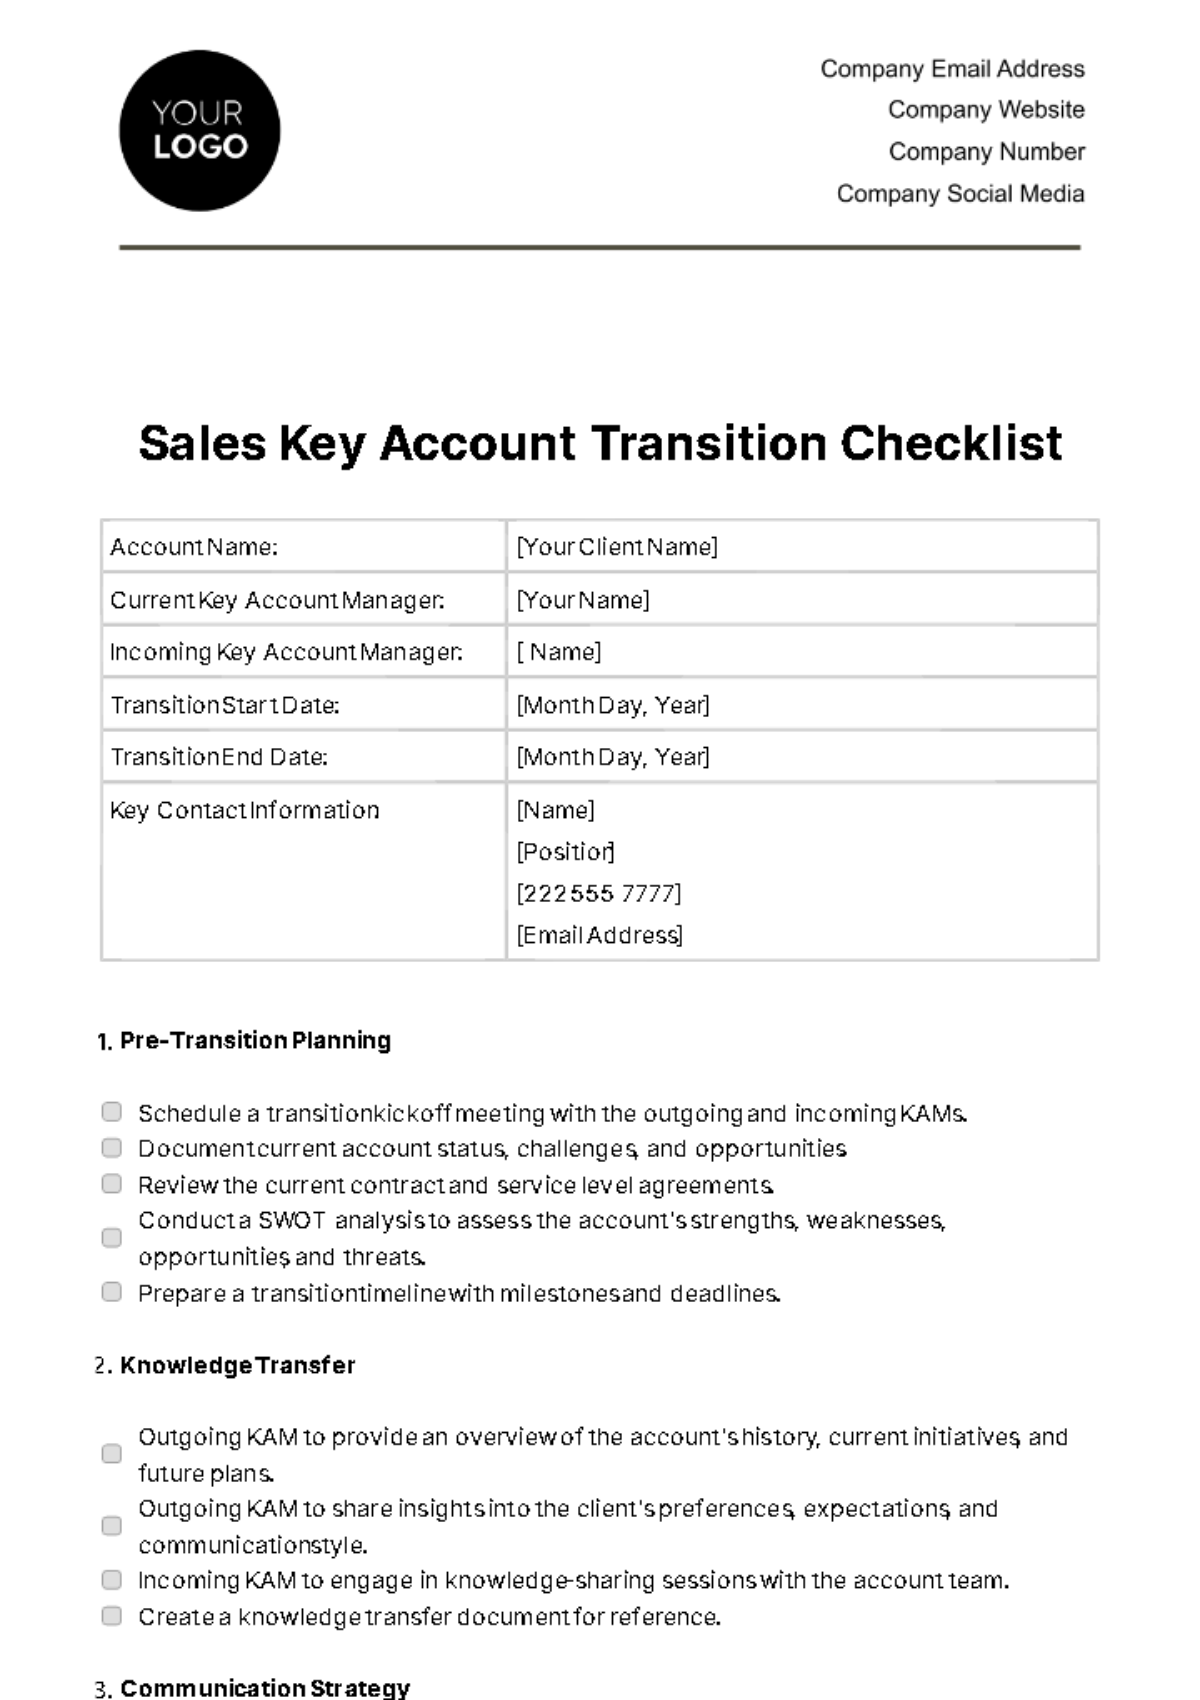 Sales Key Account Transition Checklist Template